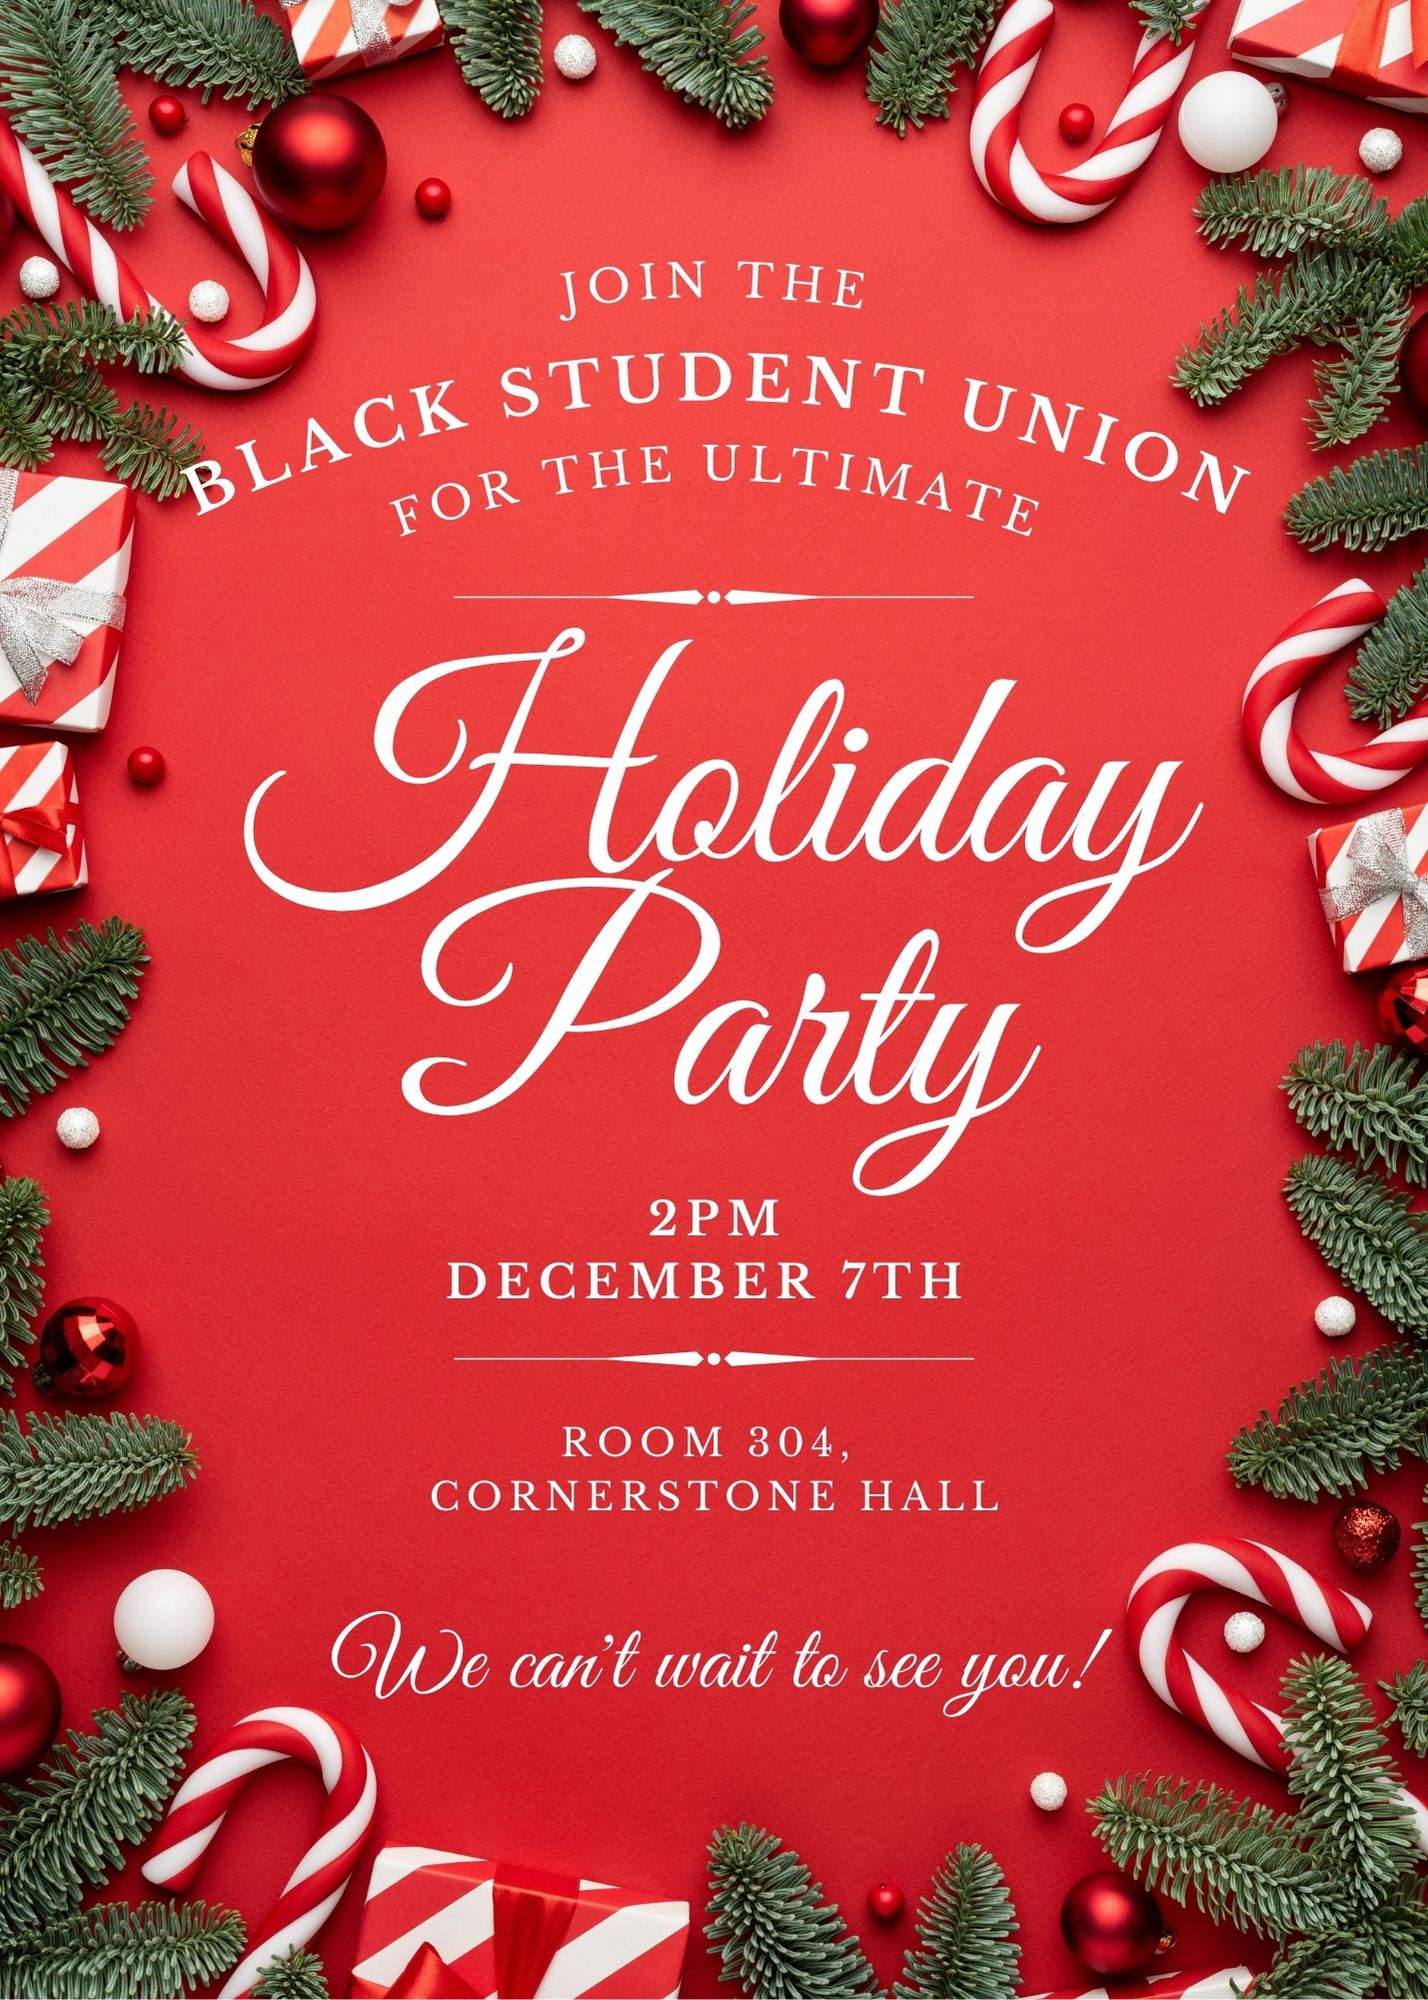 BSU Holiday Party flyer